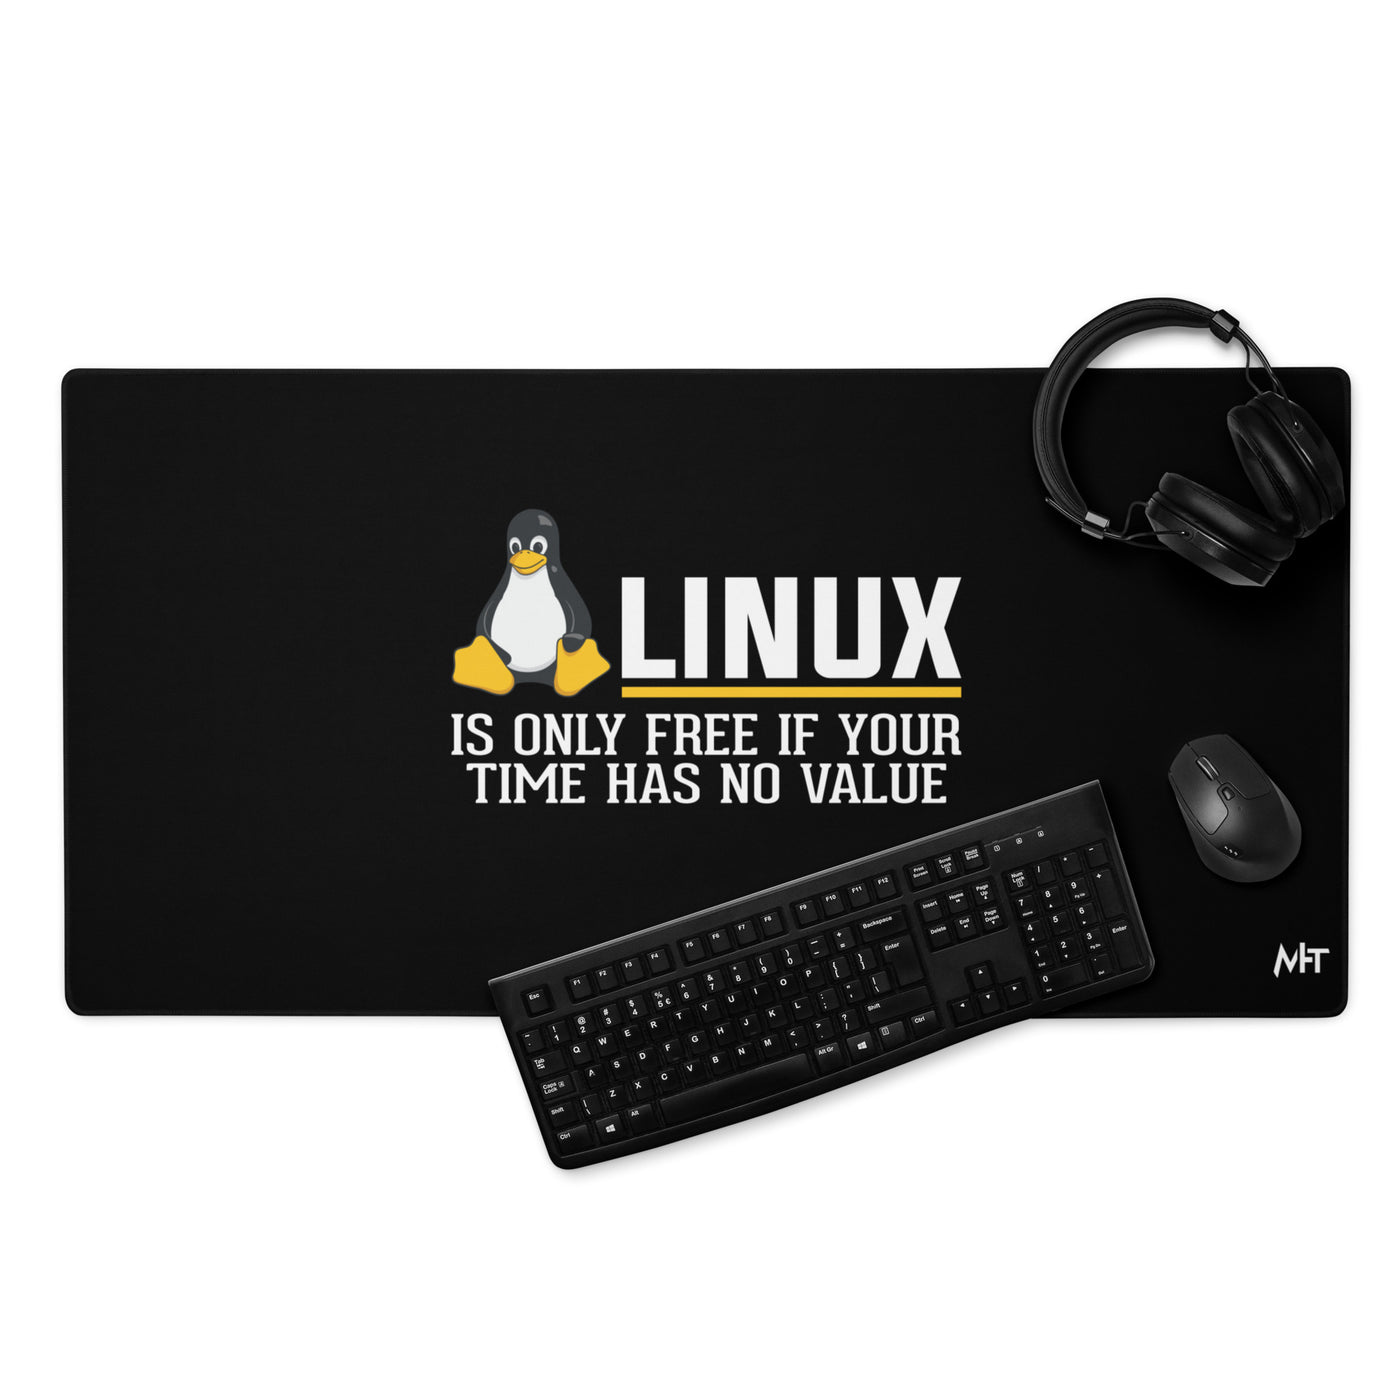 Linux is free only when your time has no value Desk Mat